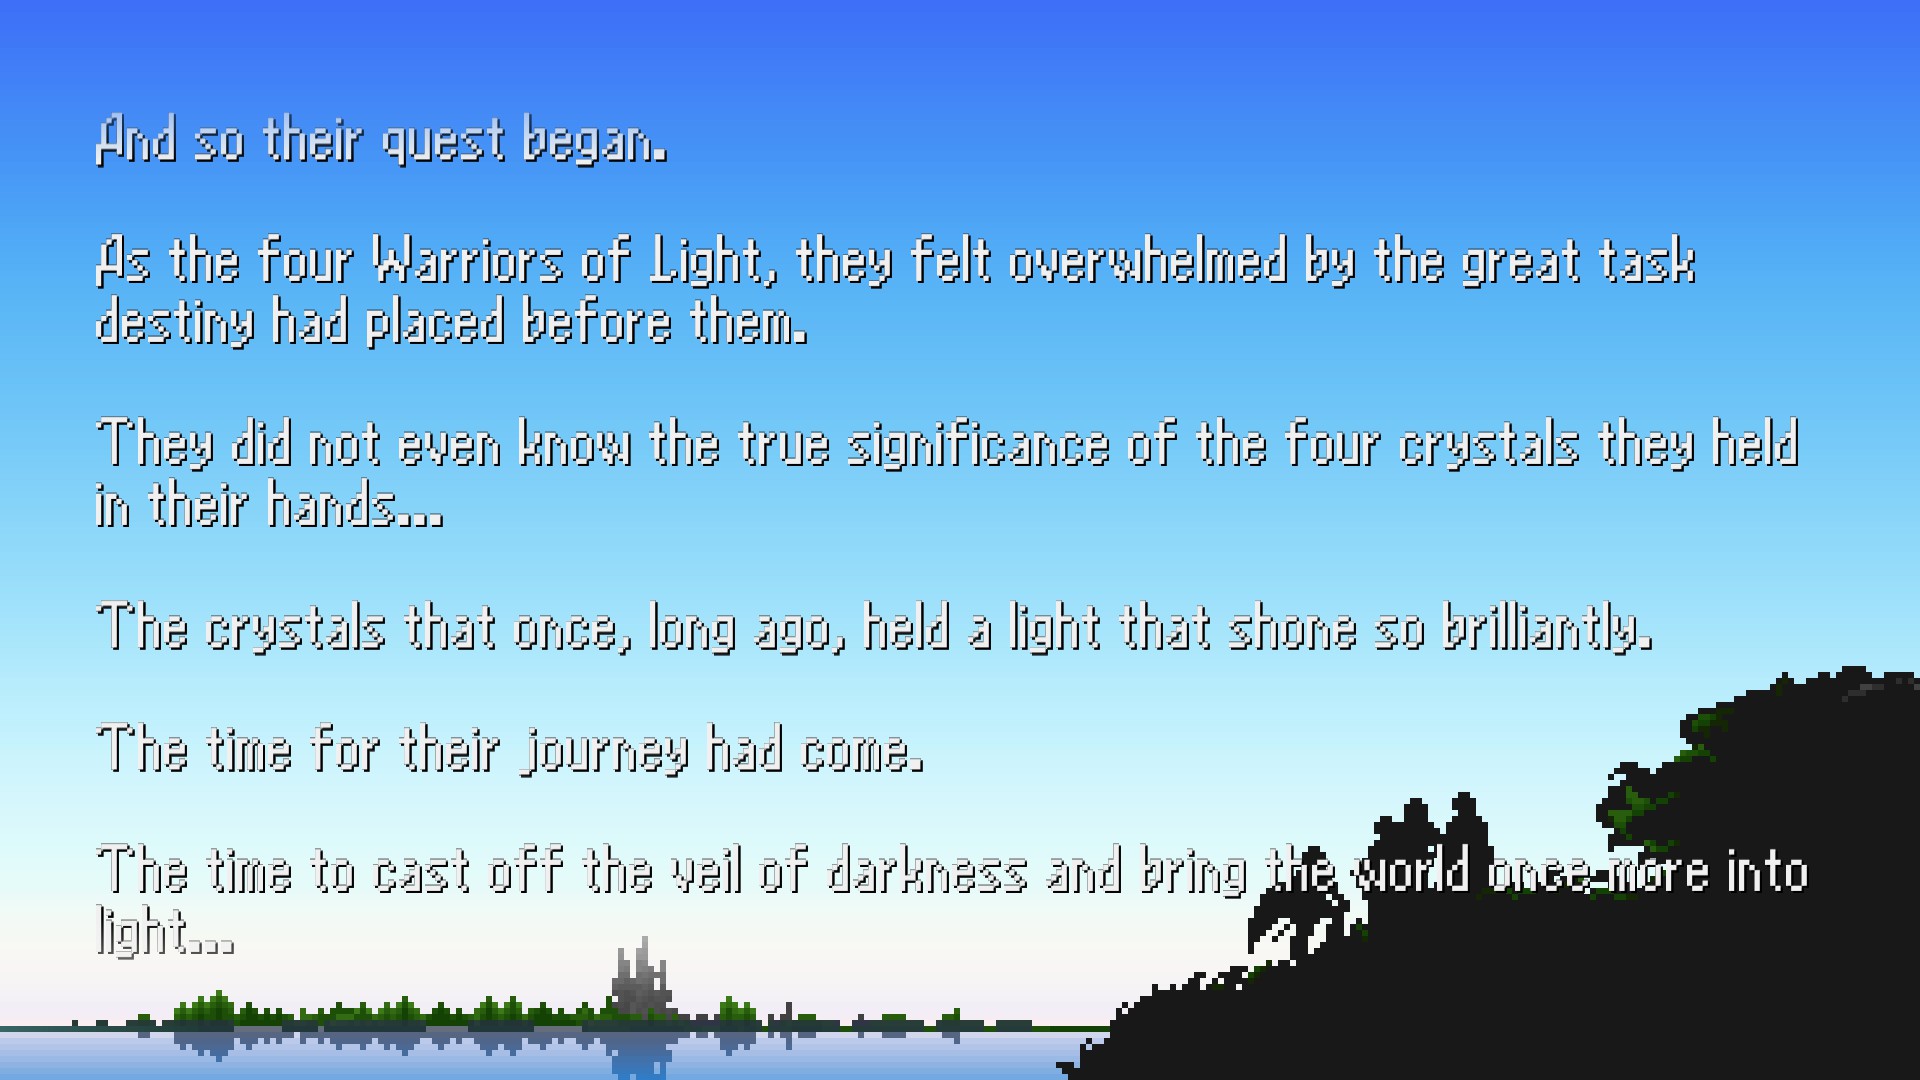 FINAL FANTASY VI How to Replace the Default Font Guide - DOWNLOAD: - 9D56A20